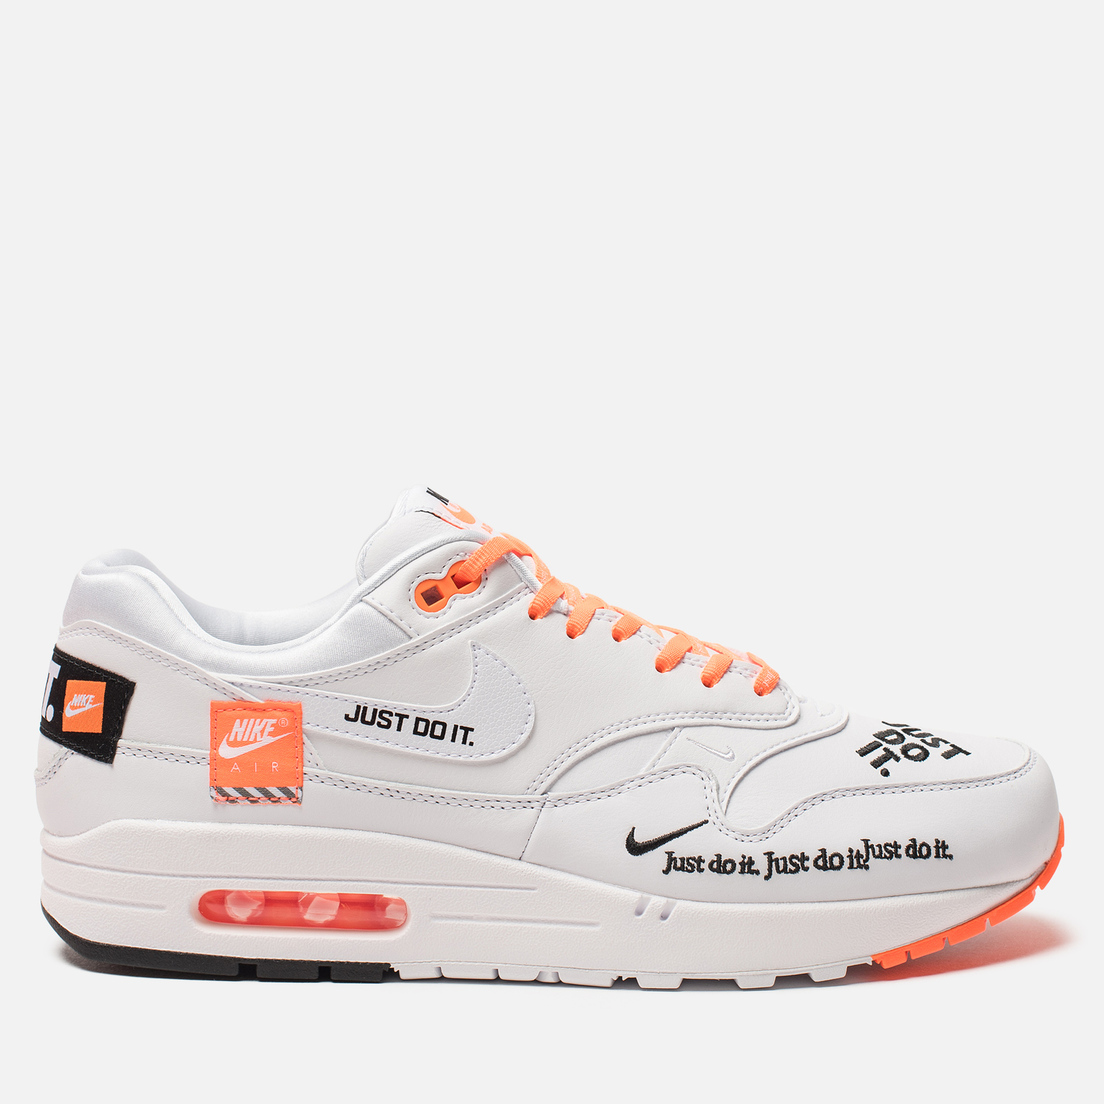 Nike Air Max 1 SE Just Do It AO1021 